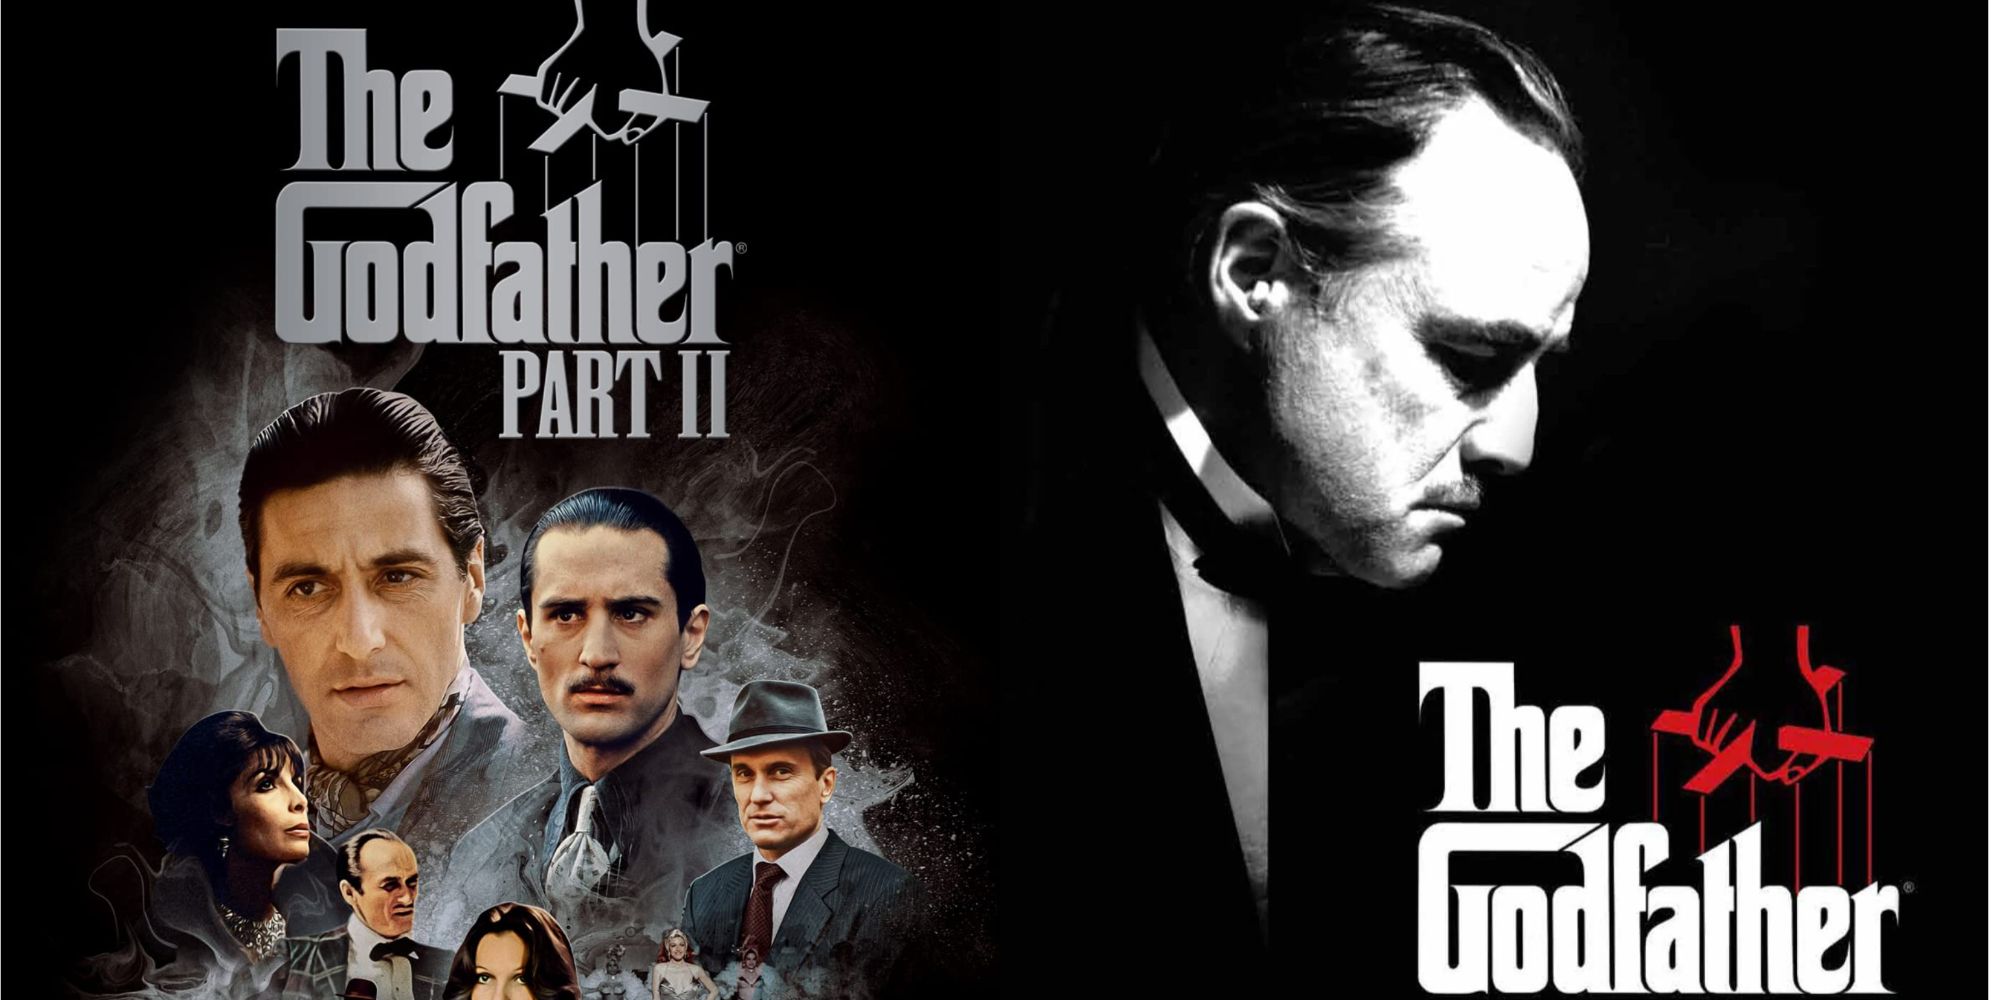 The Godfather movie posters